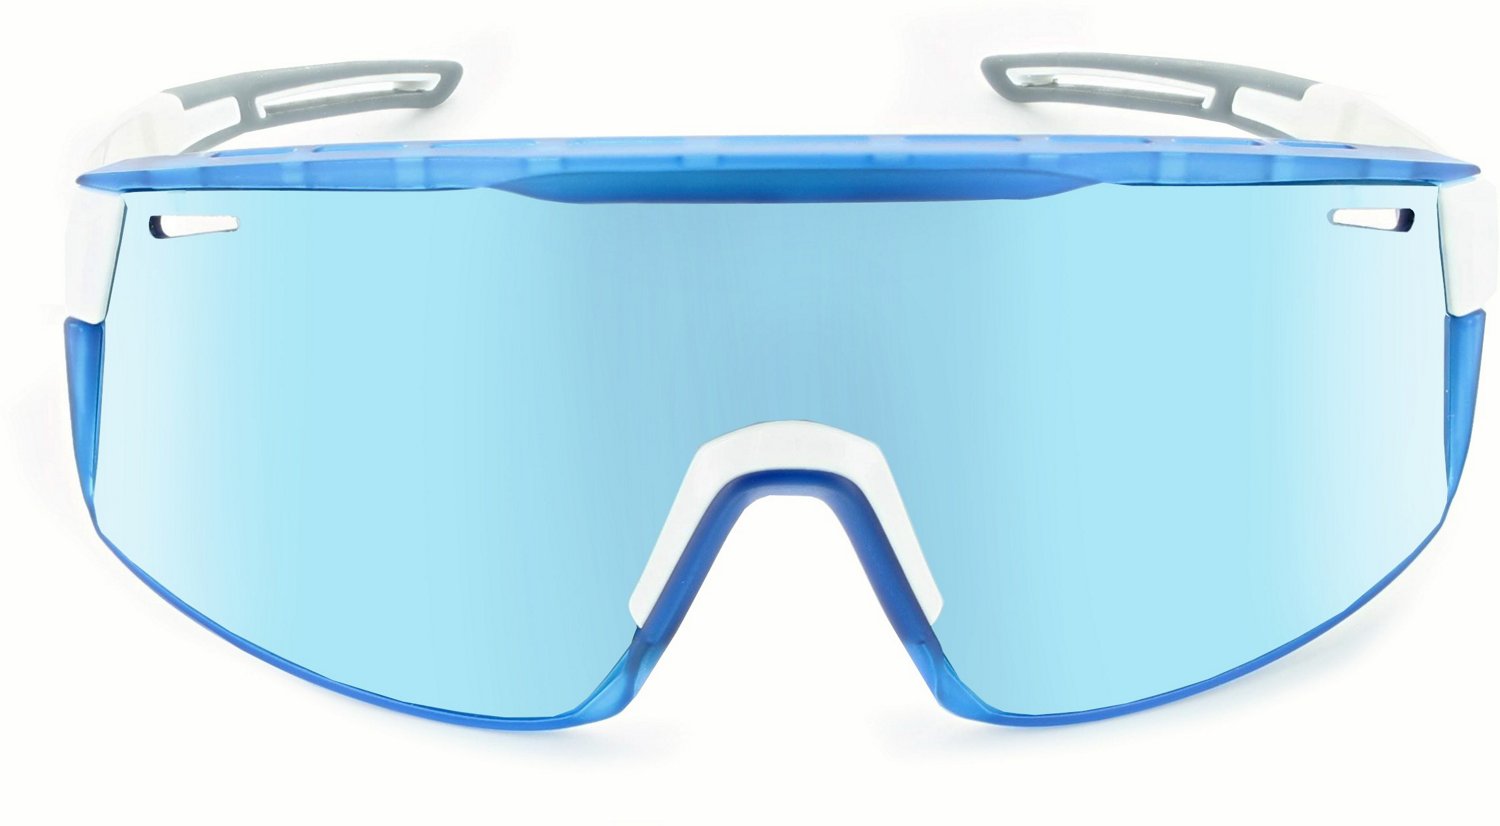 Optic Nerve FixieMAX Sunglasses | Free Shipping at Academy